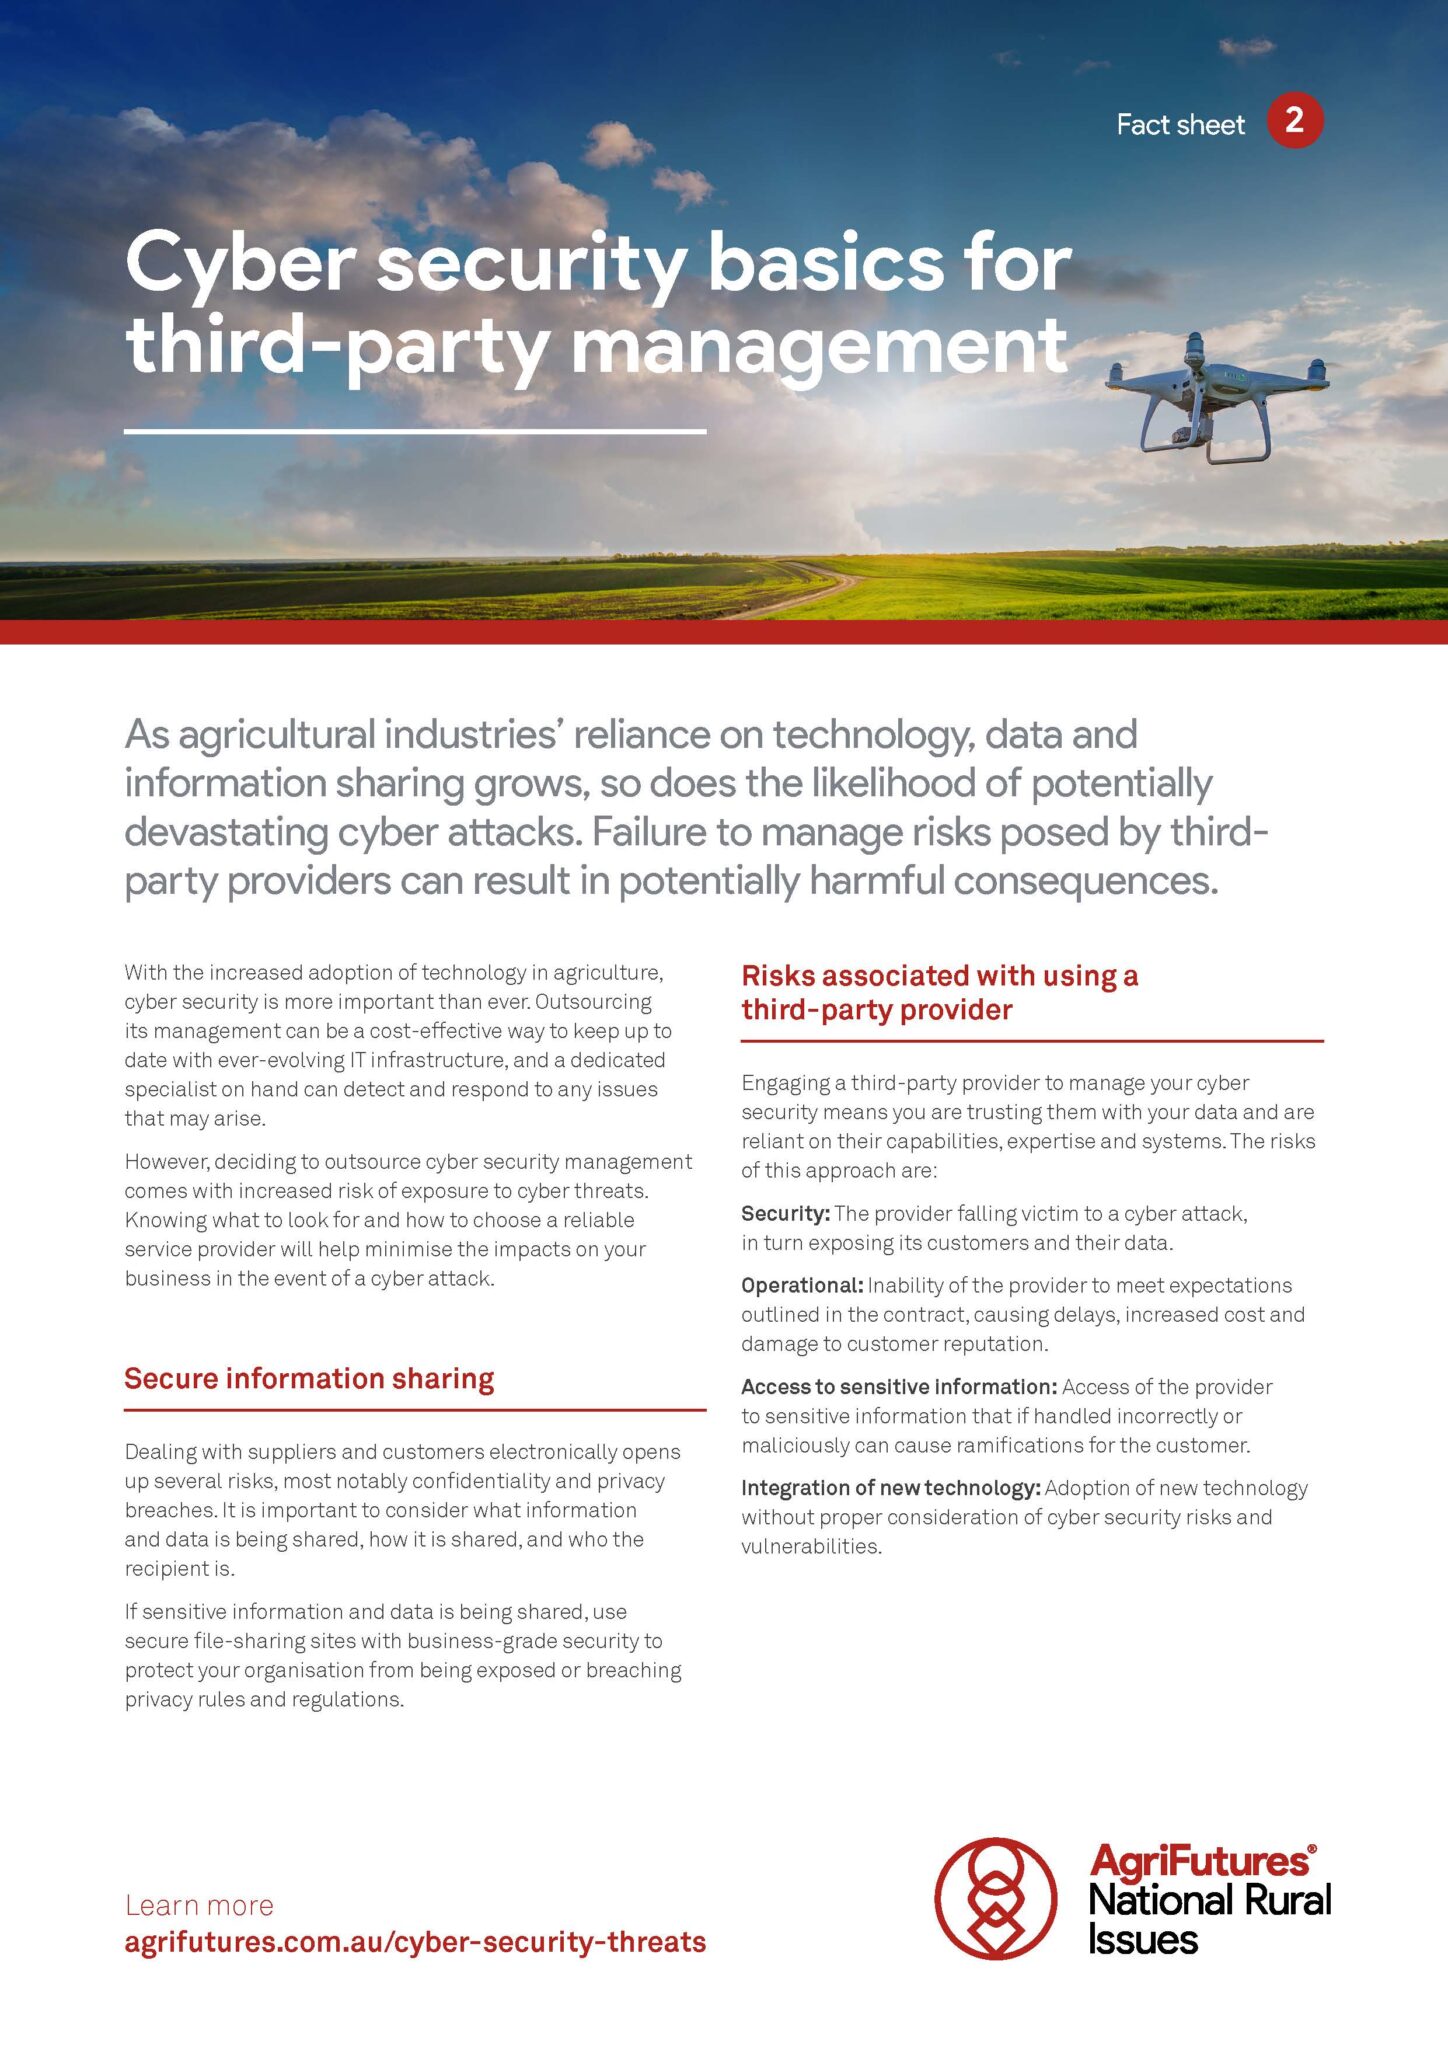 Fact sheet: Cyber security basics for third-party management - image